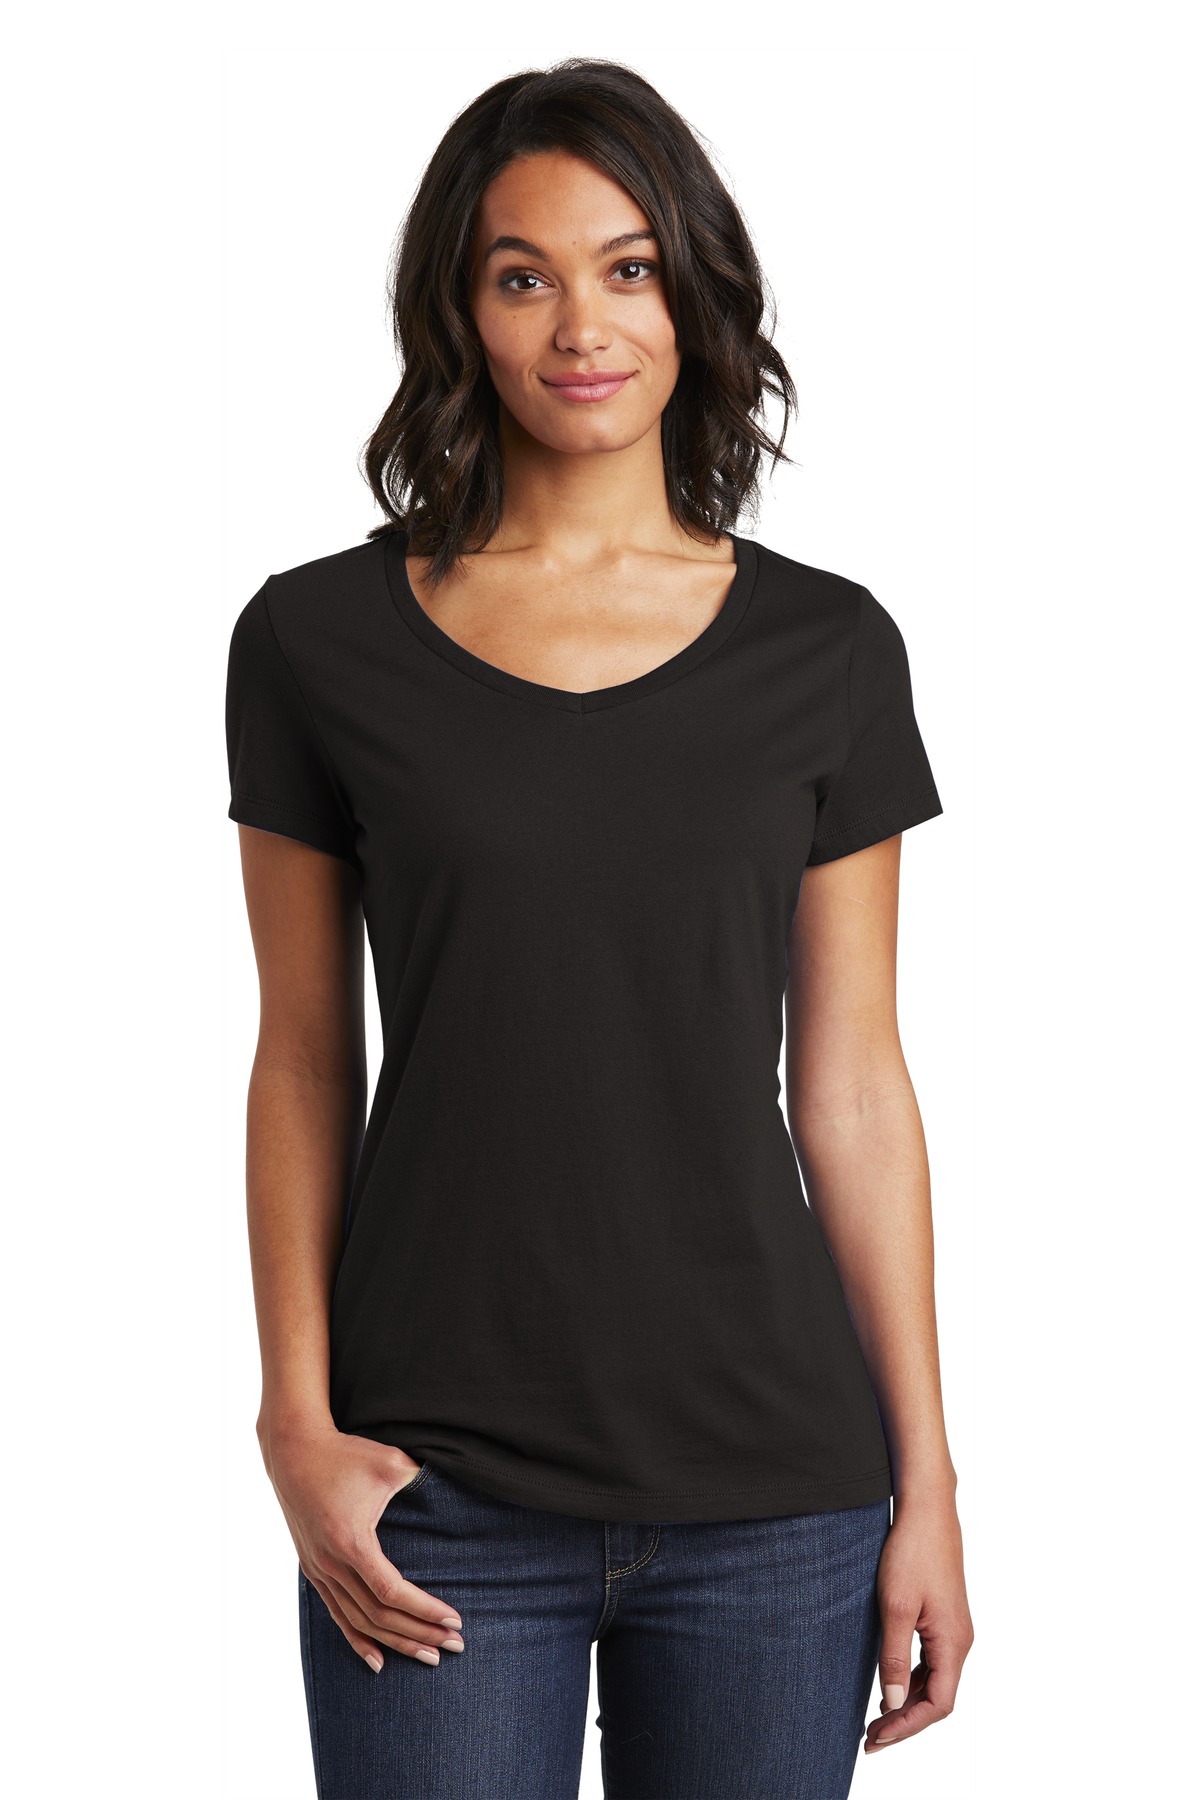 District  Womens Very Important Tee  V-Neck. DT6503